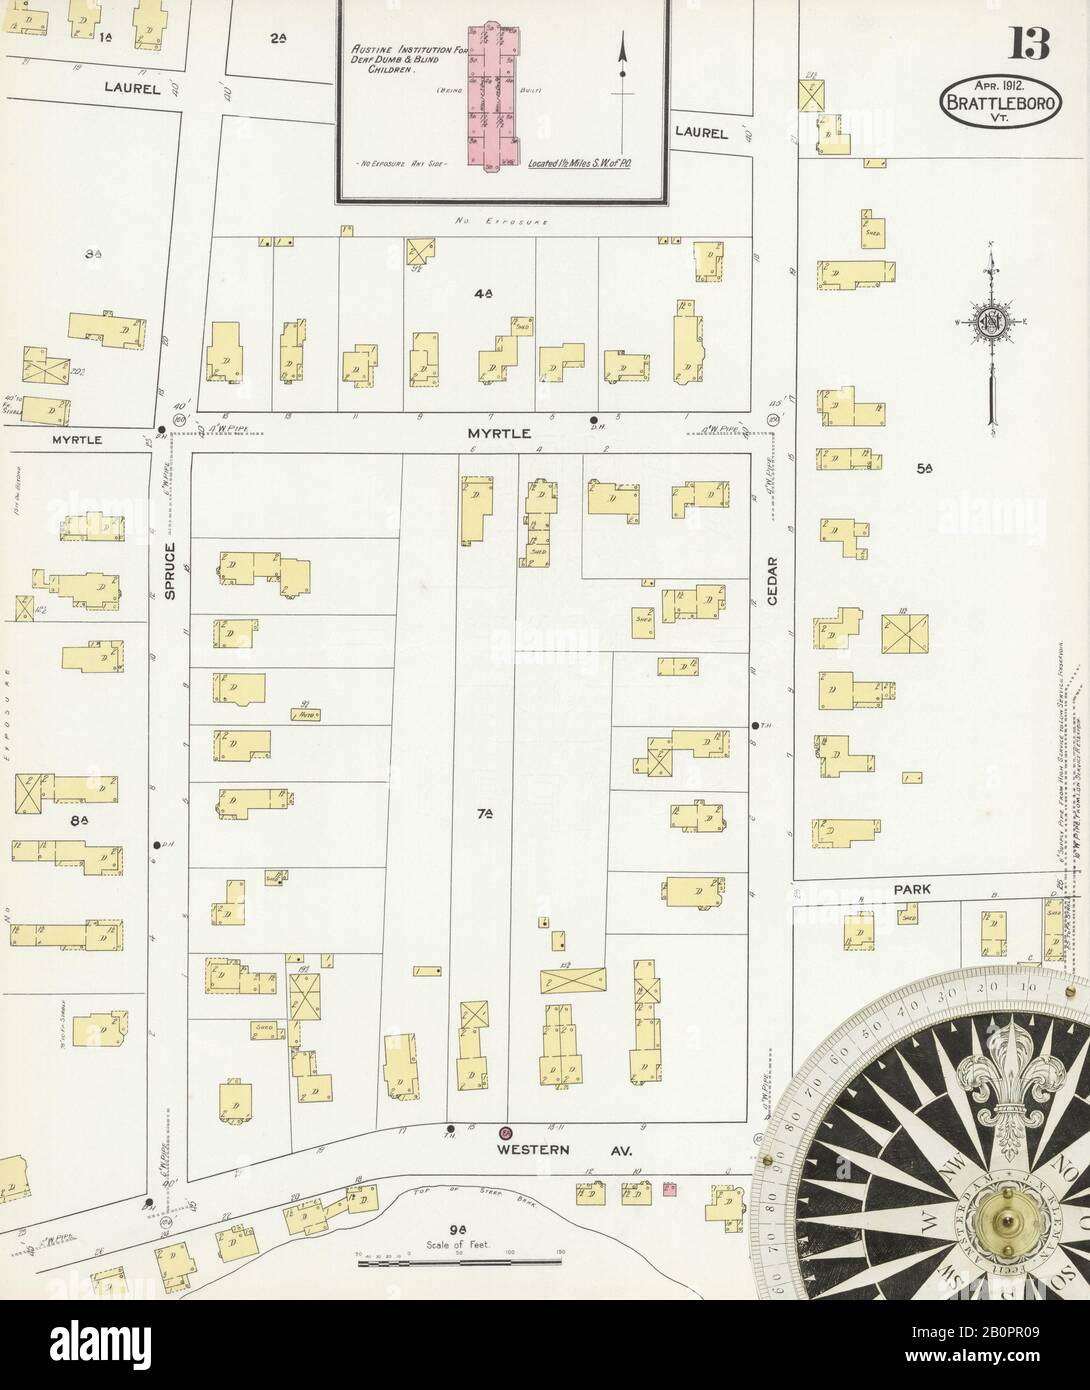 Image 13 of Sanborn Fire Insurance Map from Brattleboro, Windham County, Vermont. Apr 1912. 17 Sheet(s), America, street map with a Nineteenth Century compass Stock Photo